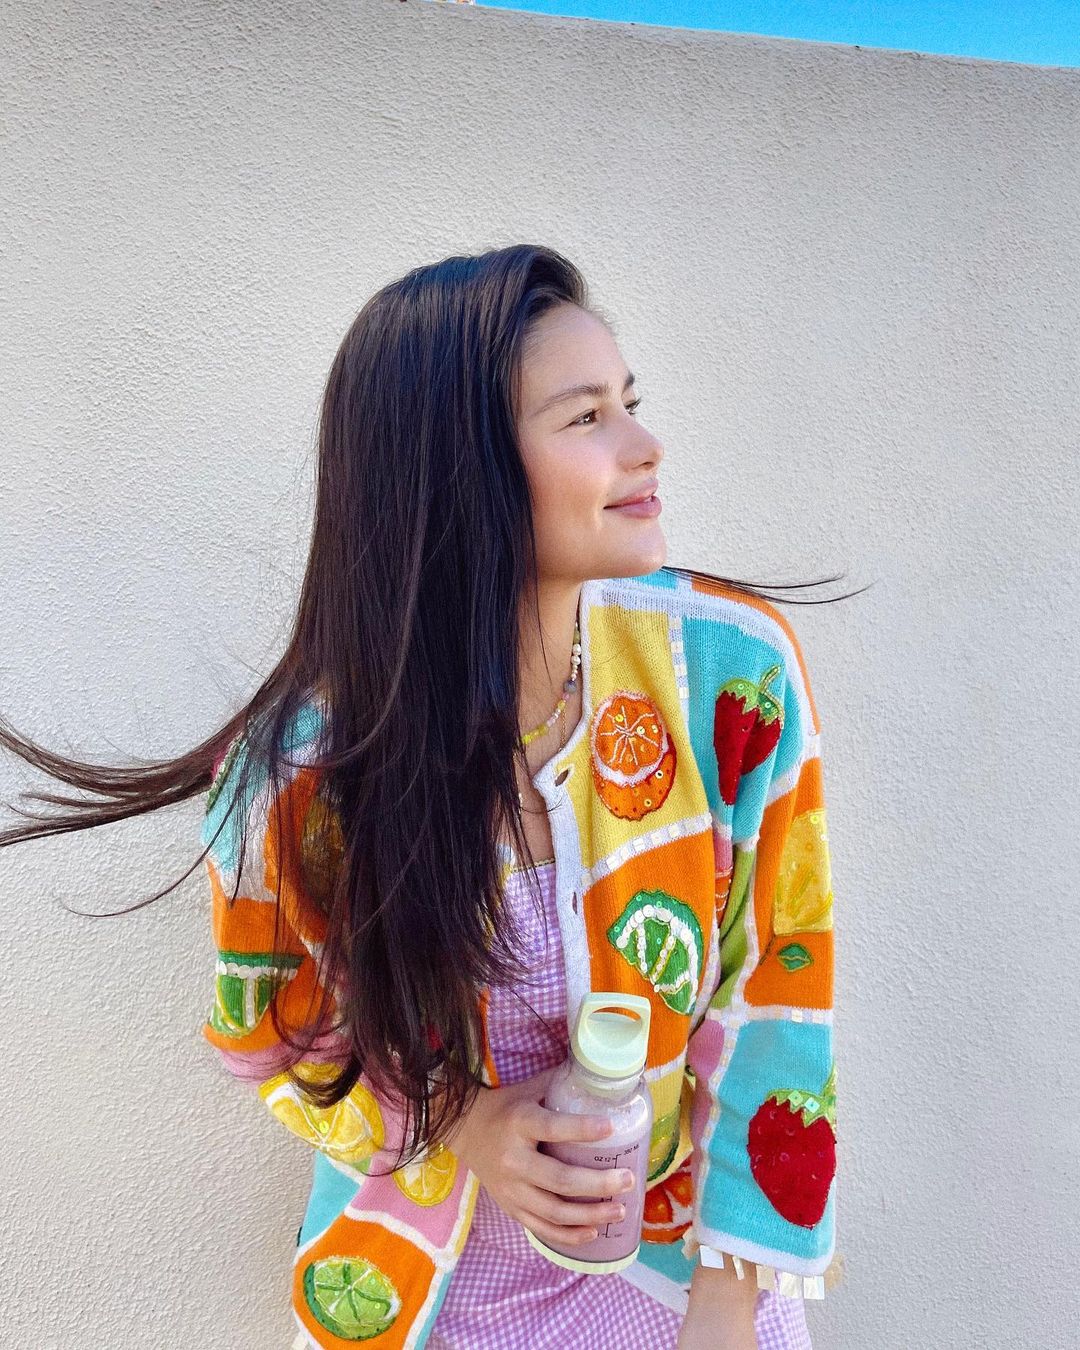 elisse joson's dainty colorful ootds